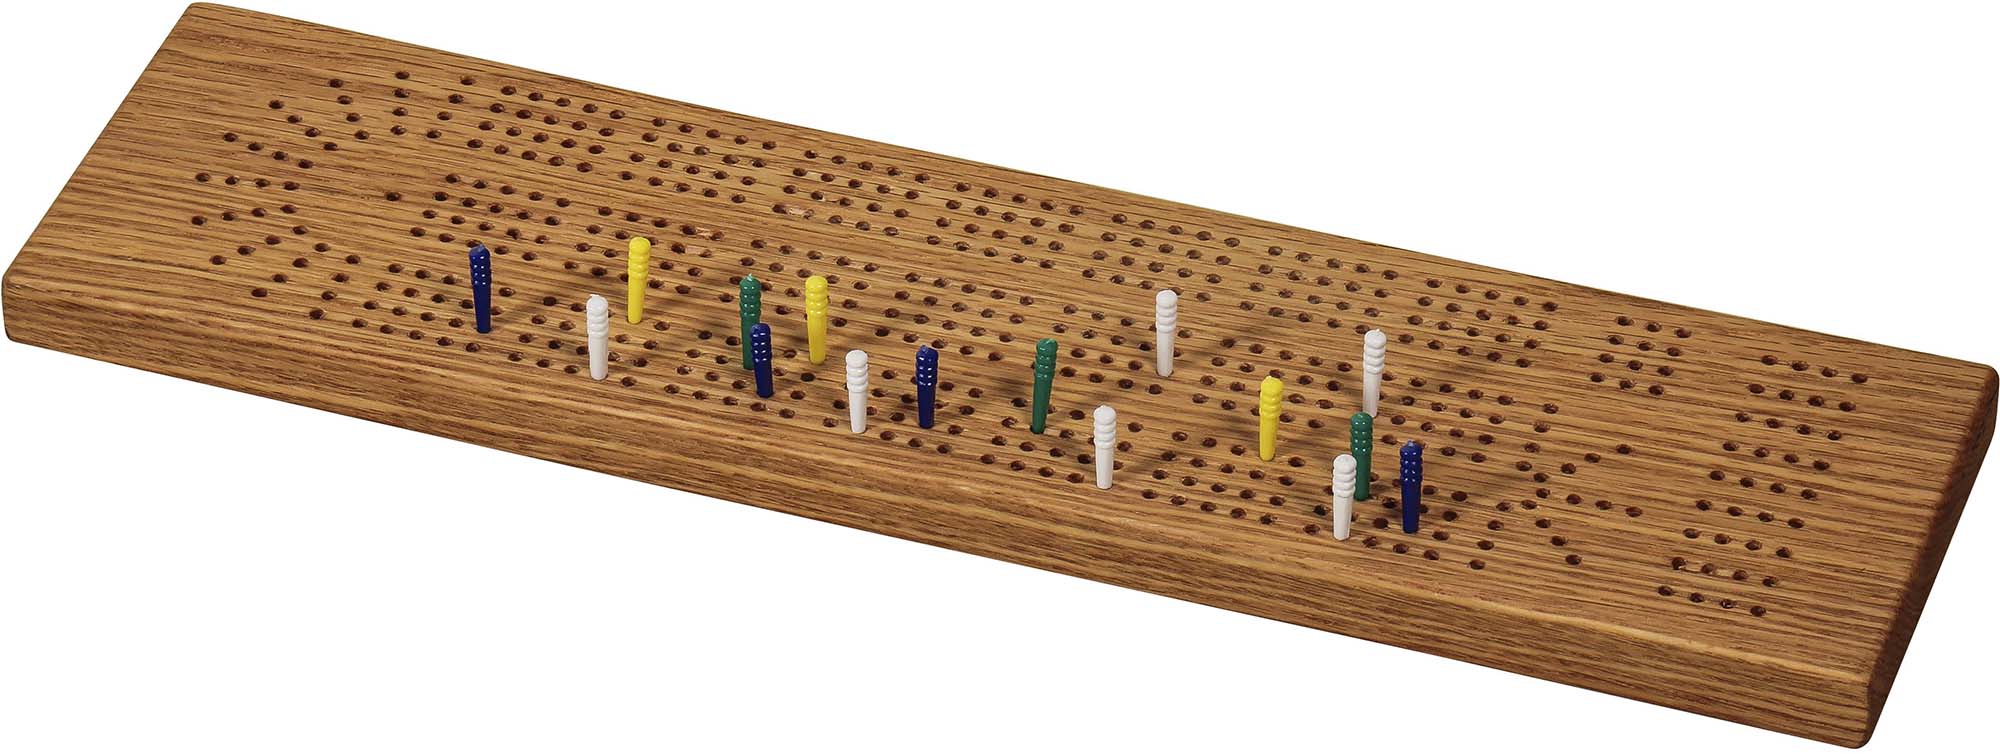 Four Player Front/Two Player Back Cribbage Board